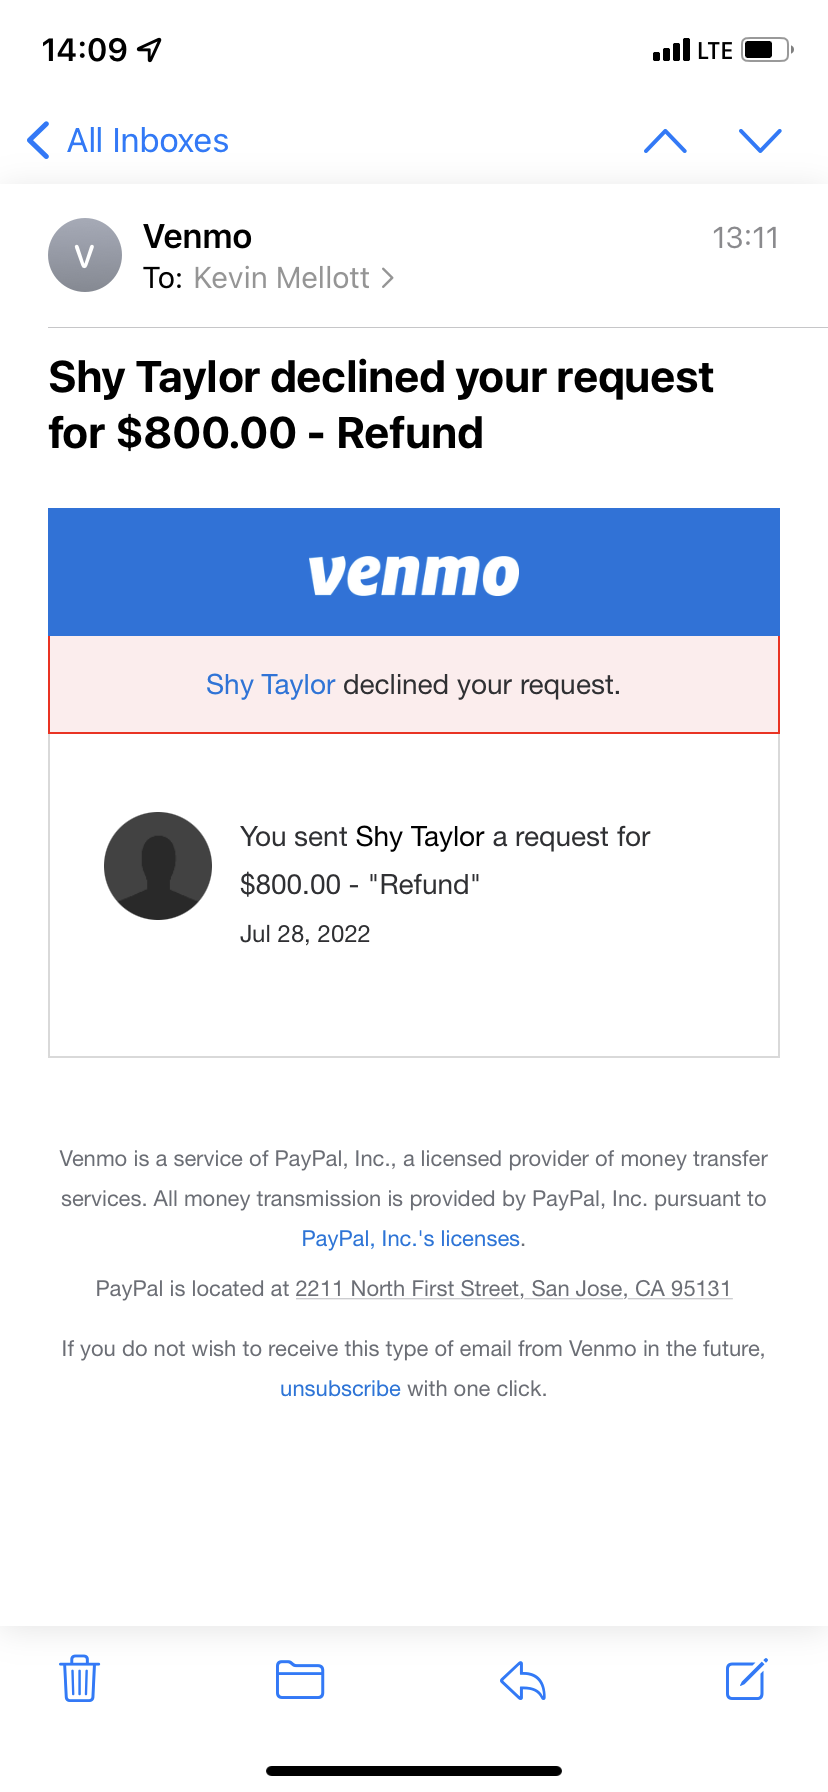 Do not send your money to this person 